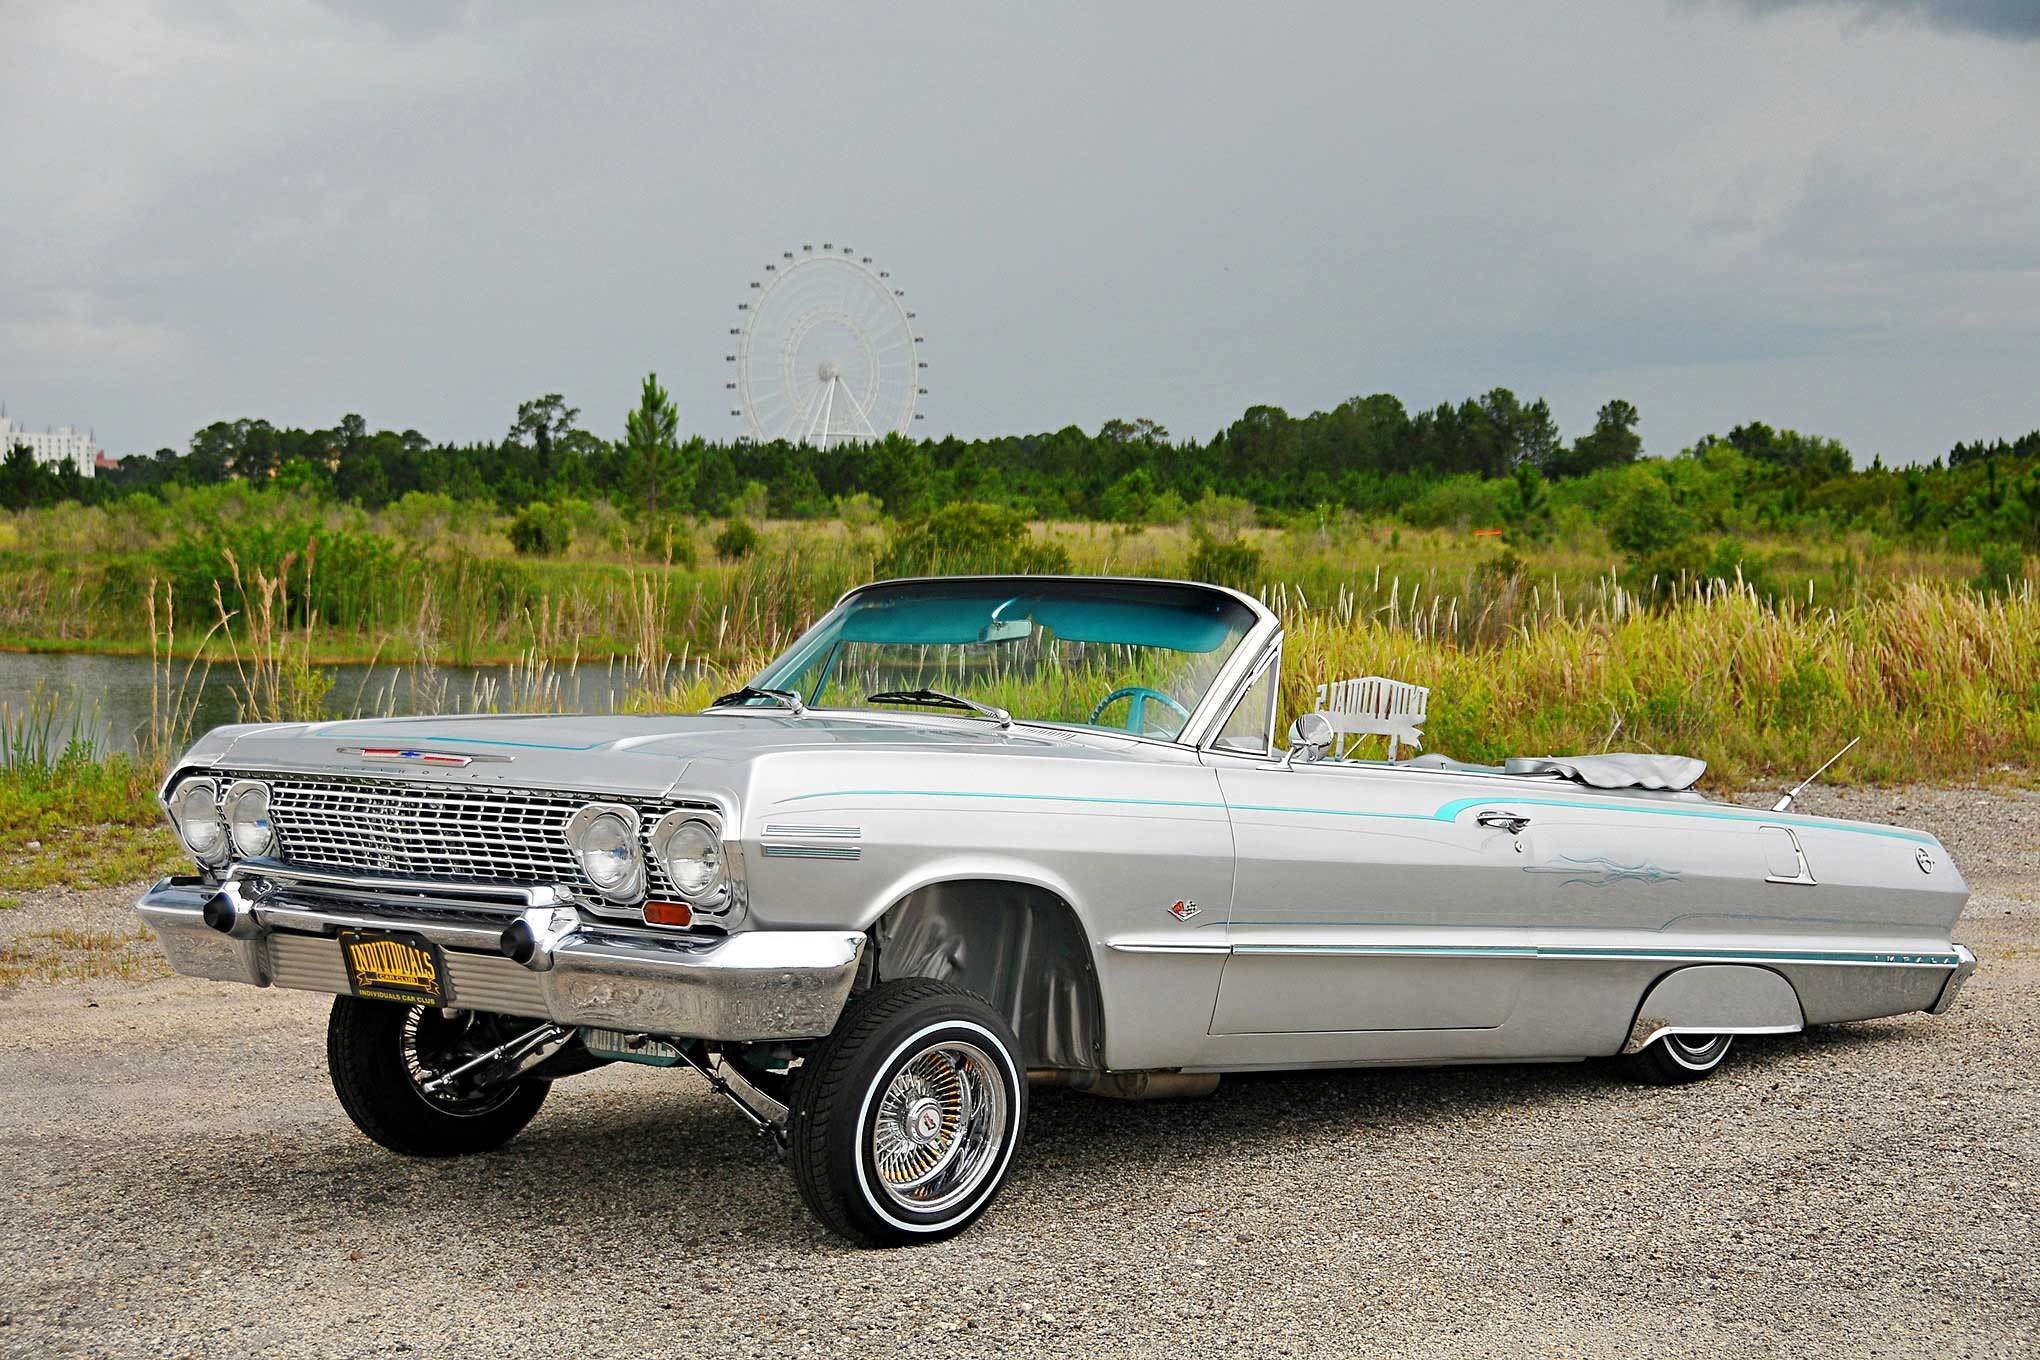 2040x1360 Chevrolet Impala Convertible Full Hd Wallpaper And Background Image Lowrider